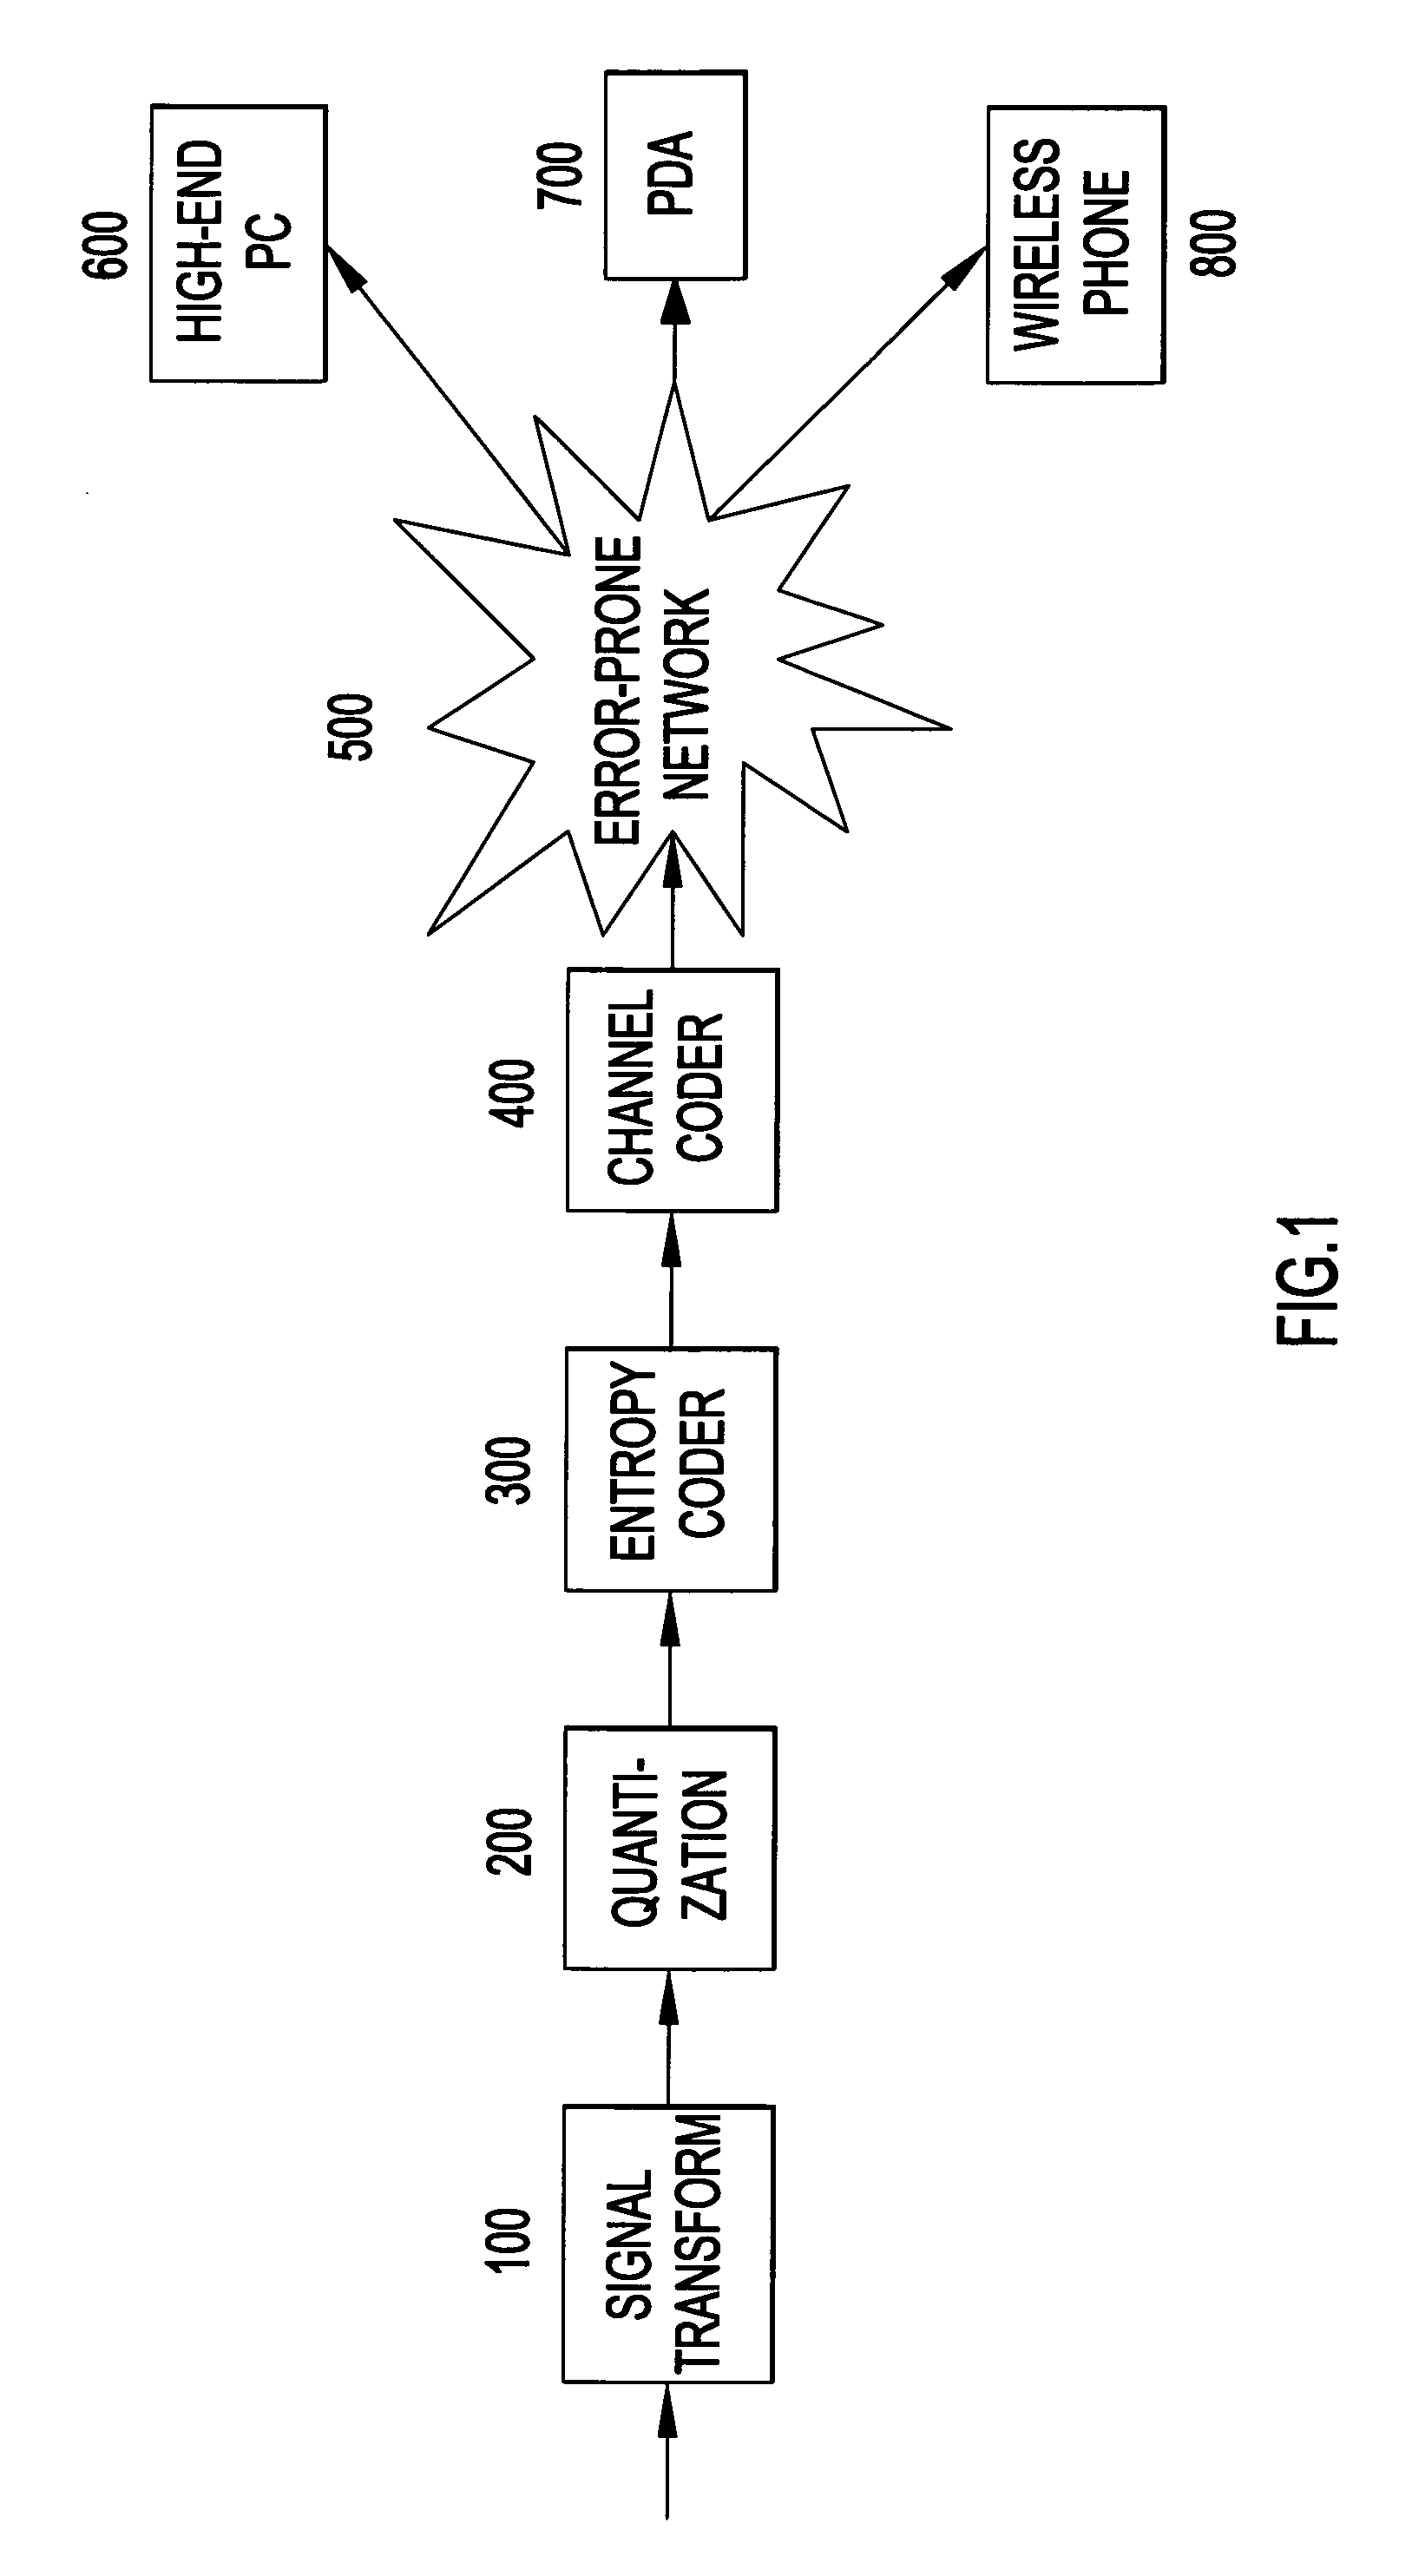 System and method for encoding three-dimensional signals using a matching pursuit algorithm